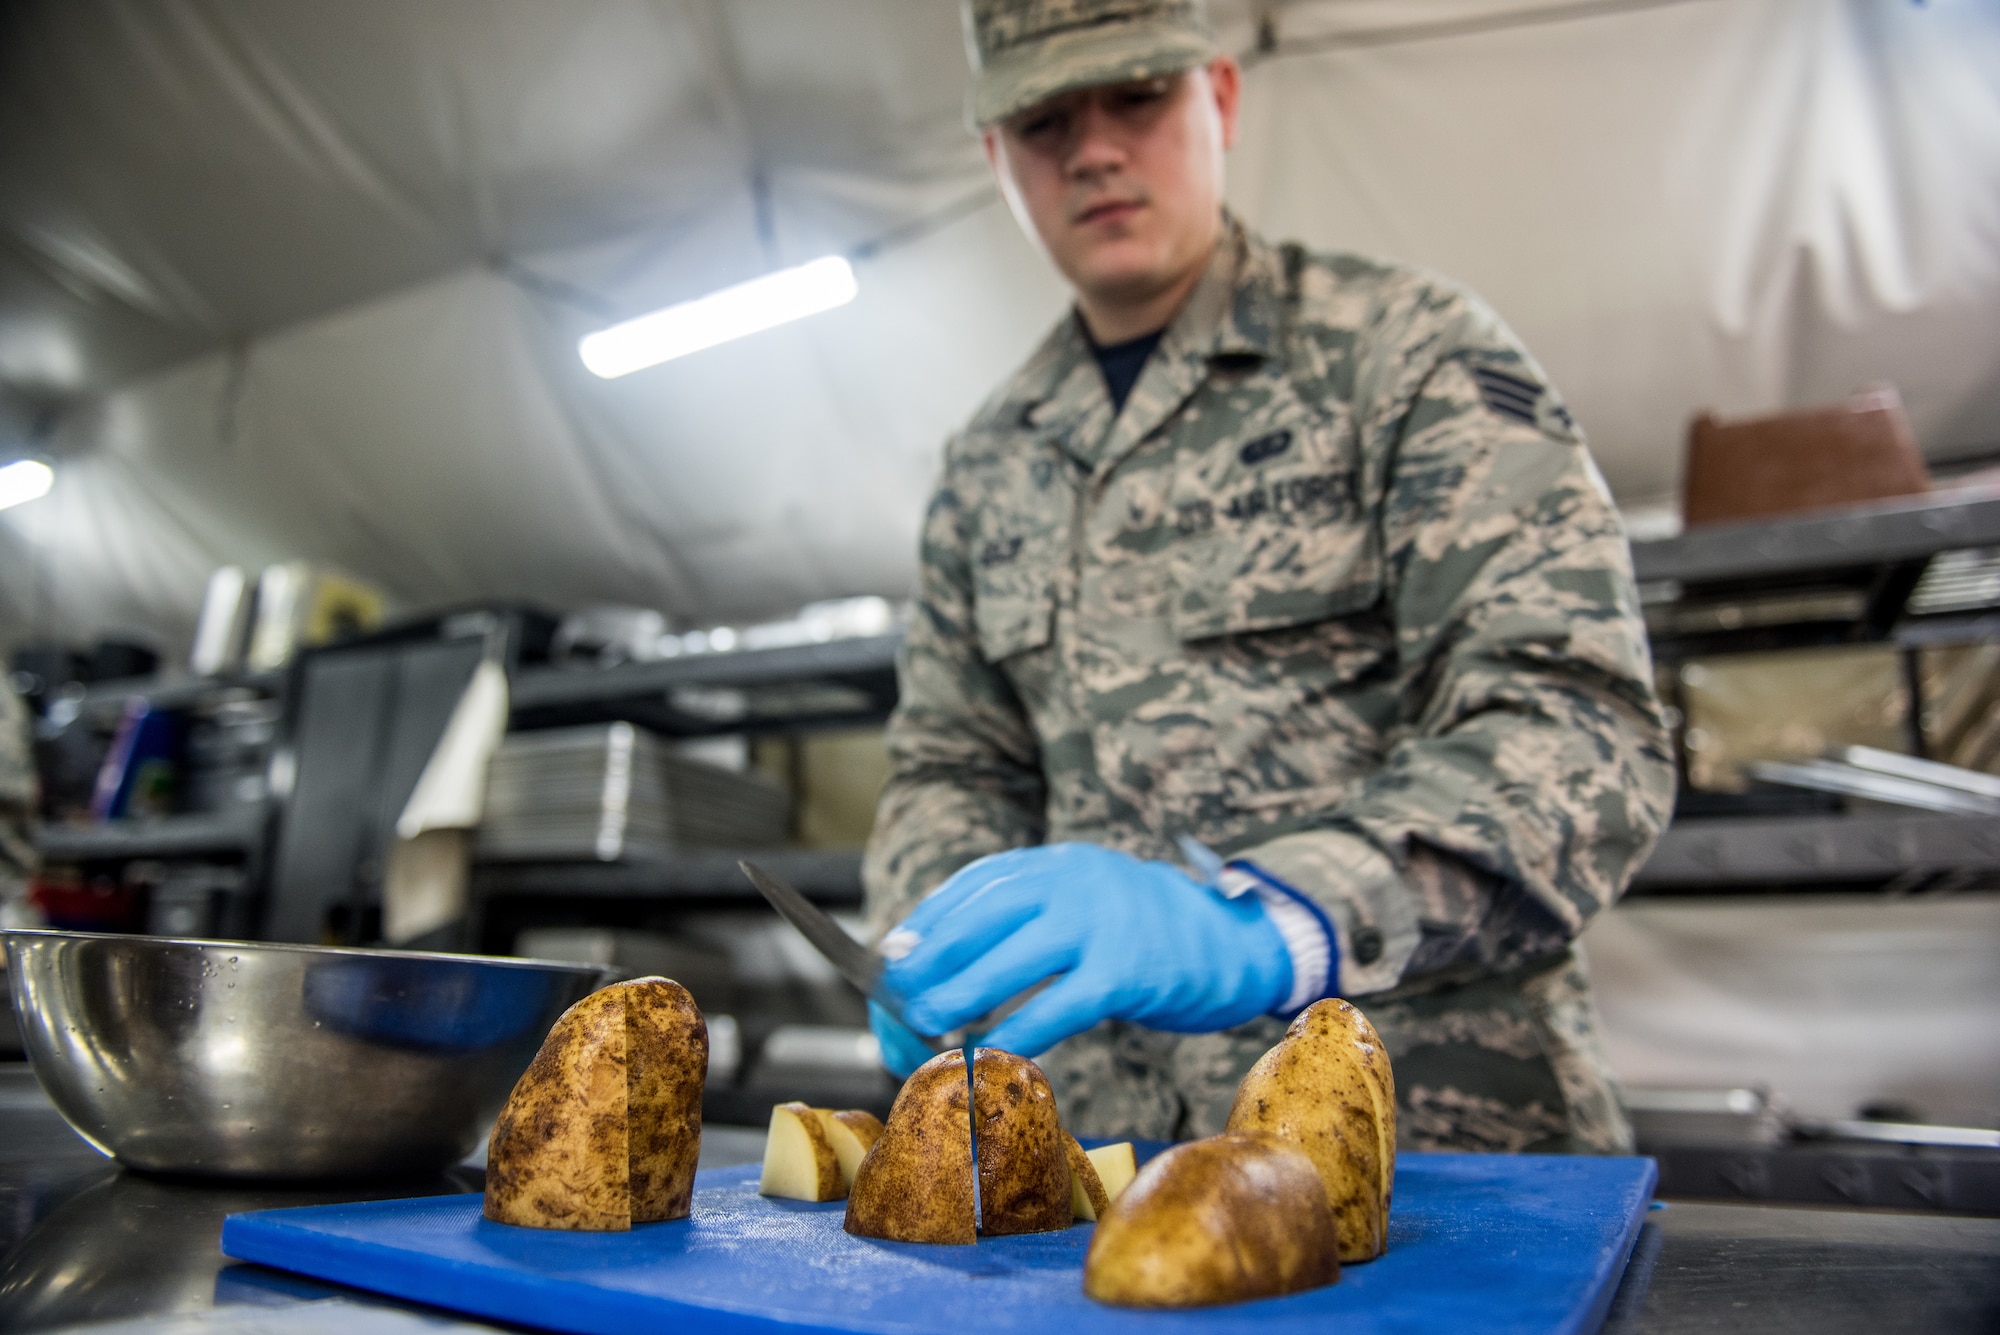 Senior Airman Bryan Seijo, 512th Memorial Affairs Squadron lodging specialist, slices potatoes during the John L. Hennessy food service competition at Dobbins Air Reserve Base, Georgia, March 9, 2019. The 512th MAS cooking team were tasked with prepping, cooking and serving food from noon to 5 p.m. (U.S. Air Force photo by Staff Sgt. Damien Taylor)